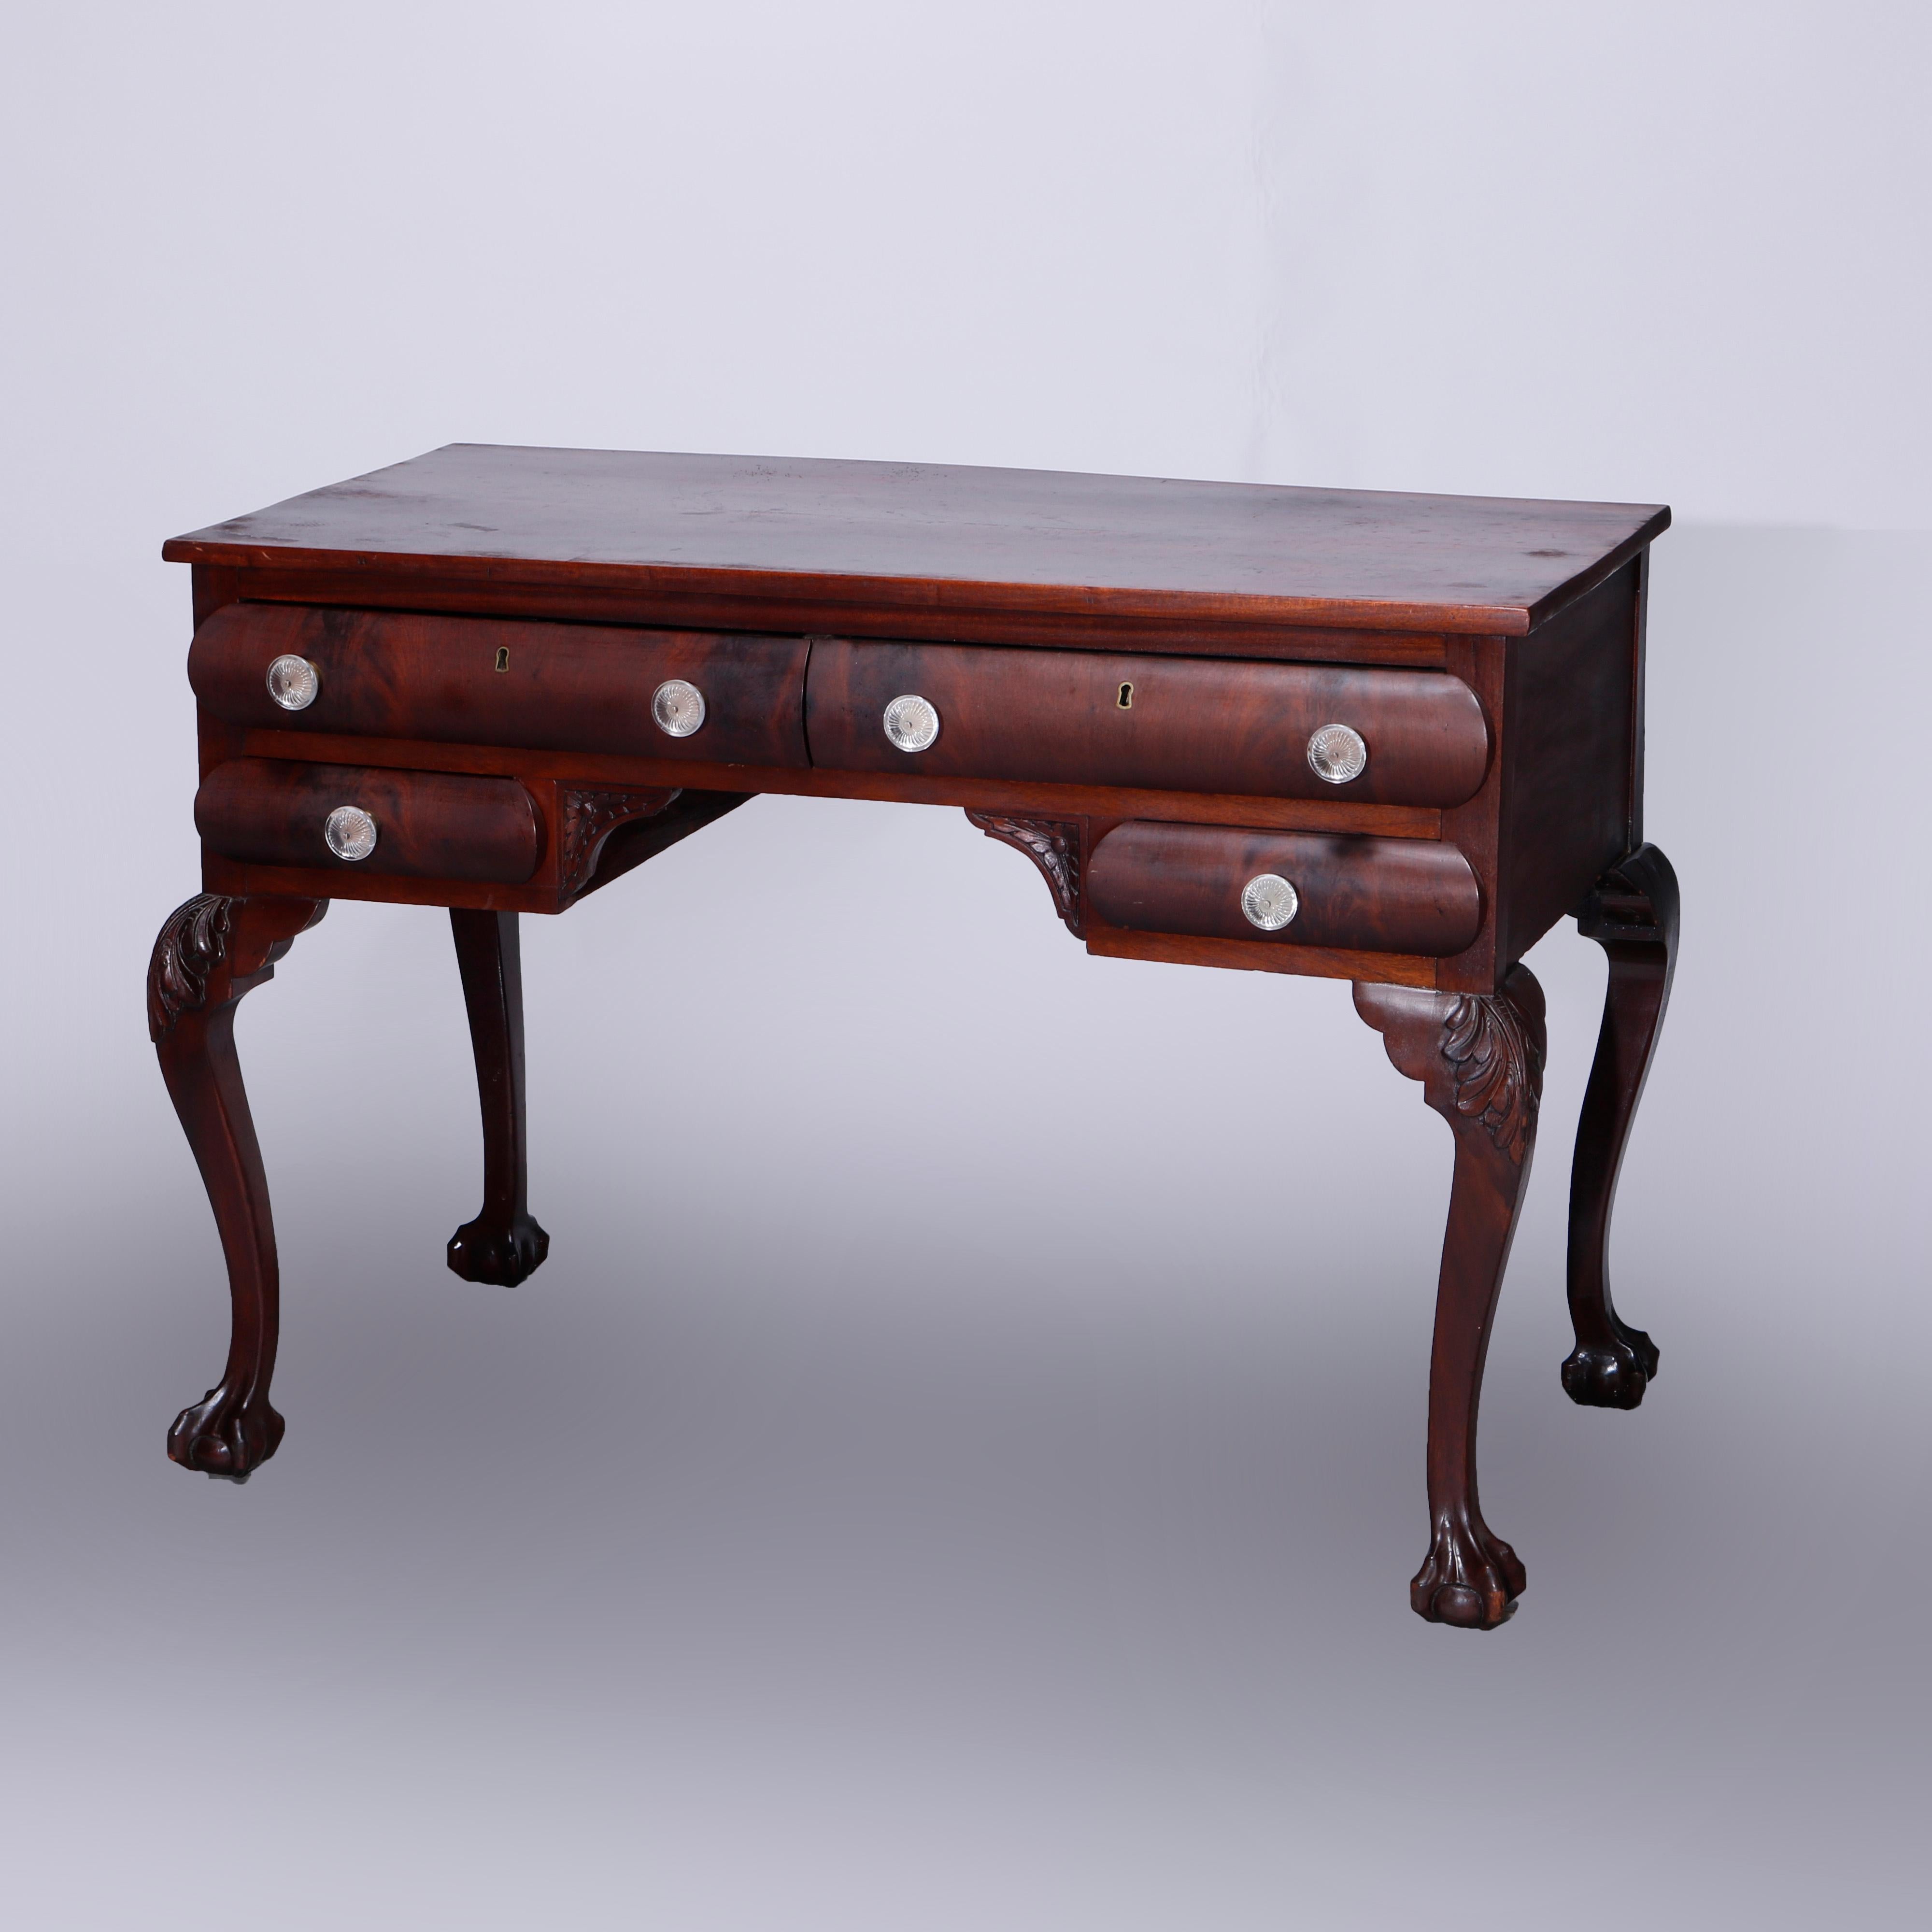 An antique Chippendale style writing desk offers mahogany construction with double upper drawers over two smaller drawers, raised on cabriole legs with carved acanthus knees terminating in claw and ball feet, c1900

Measures - 30.5''H x 42.25''W x